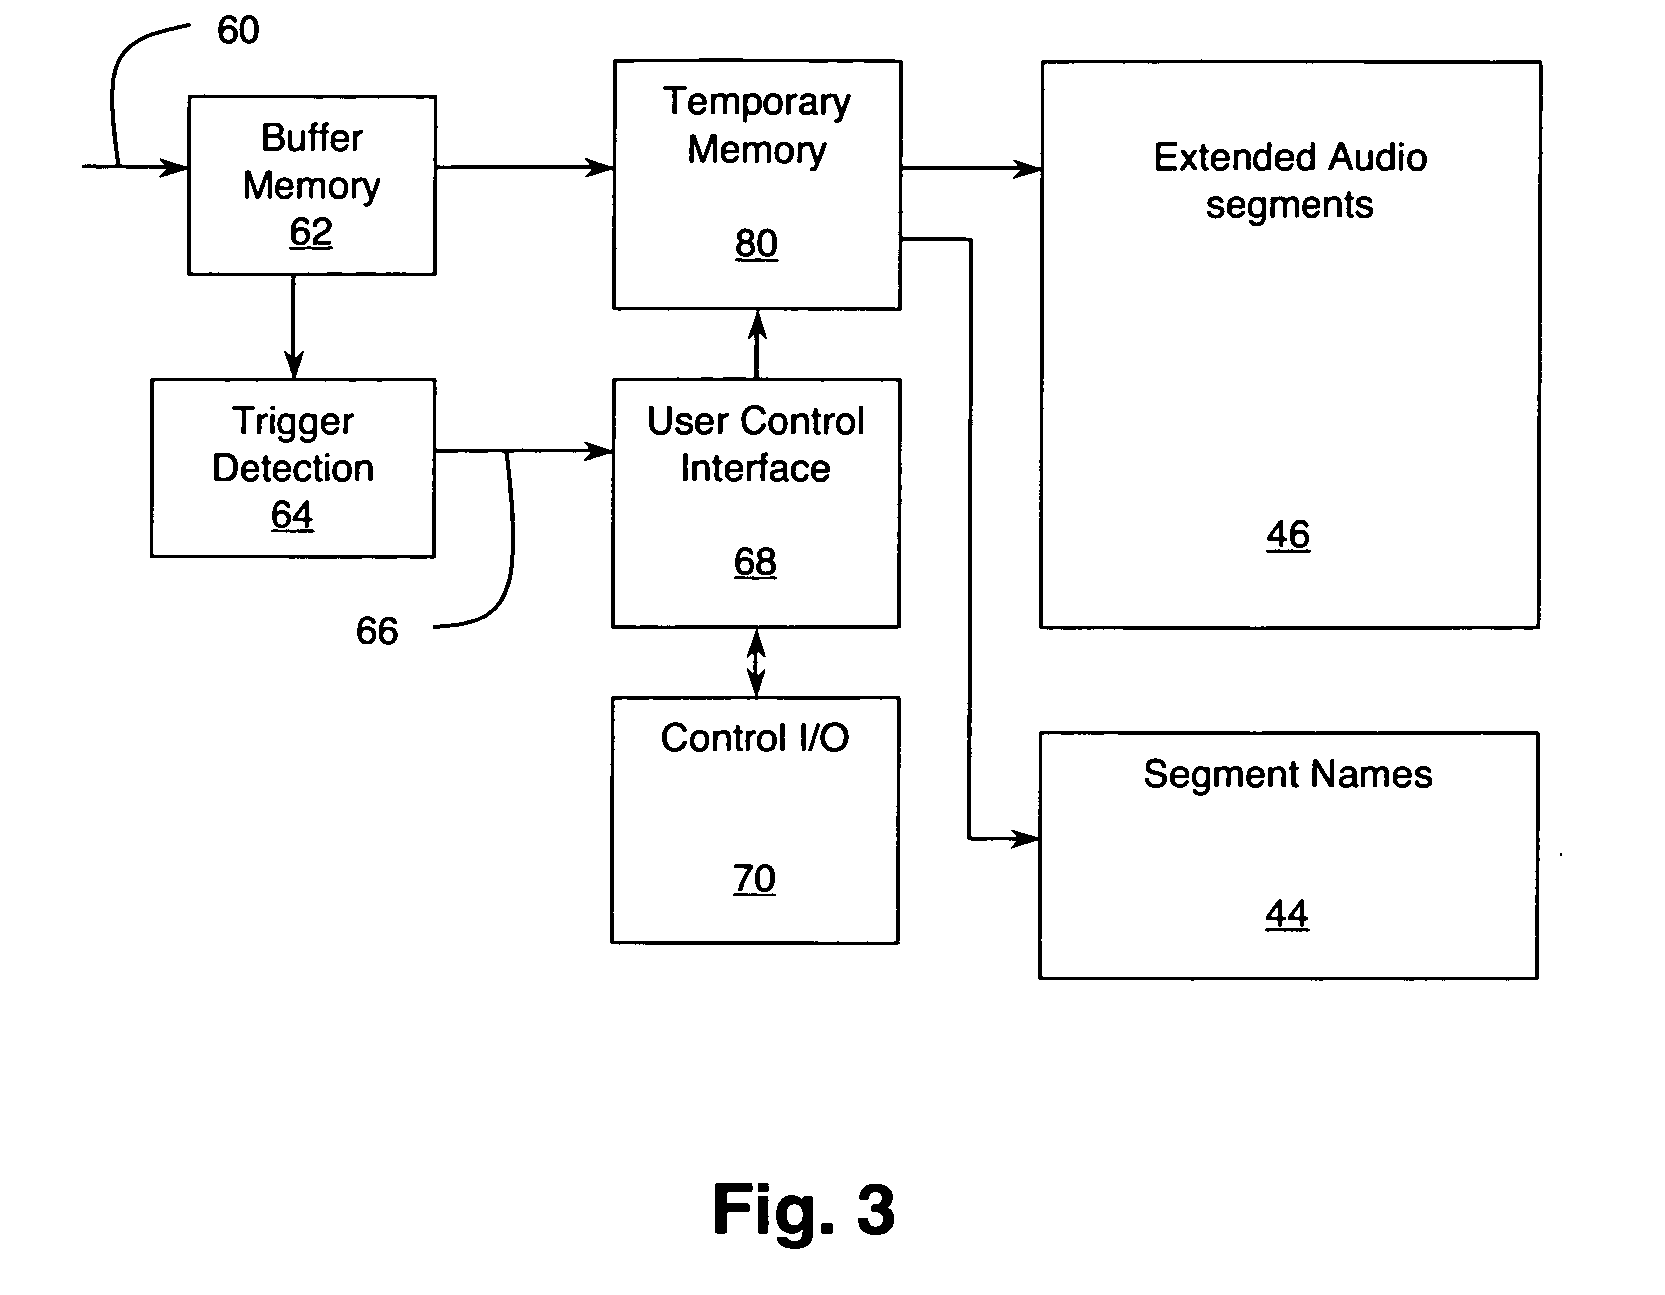 System and method for detecting and storing important information